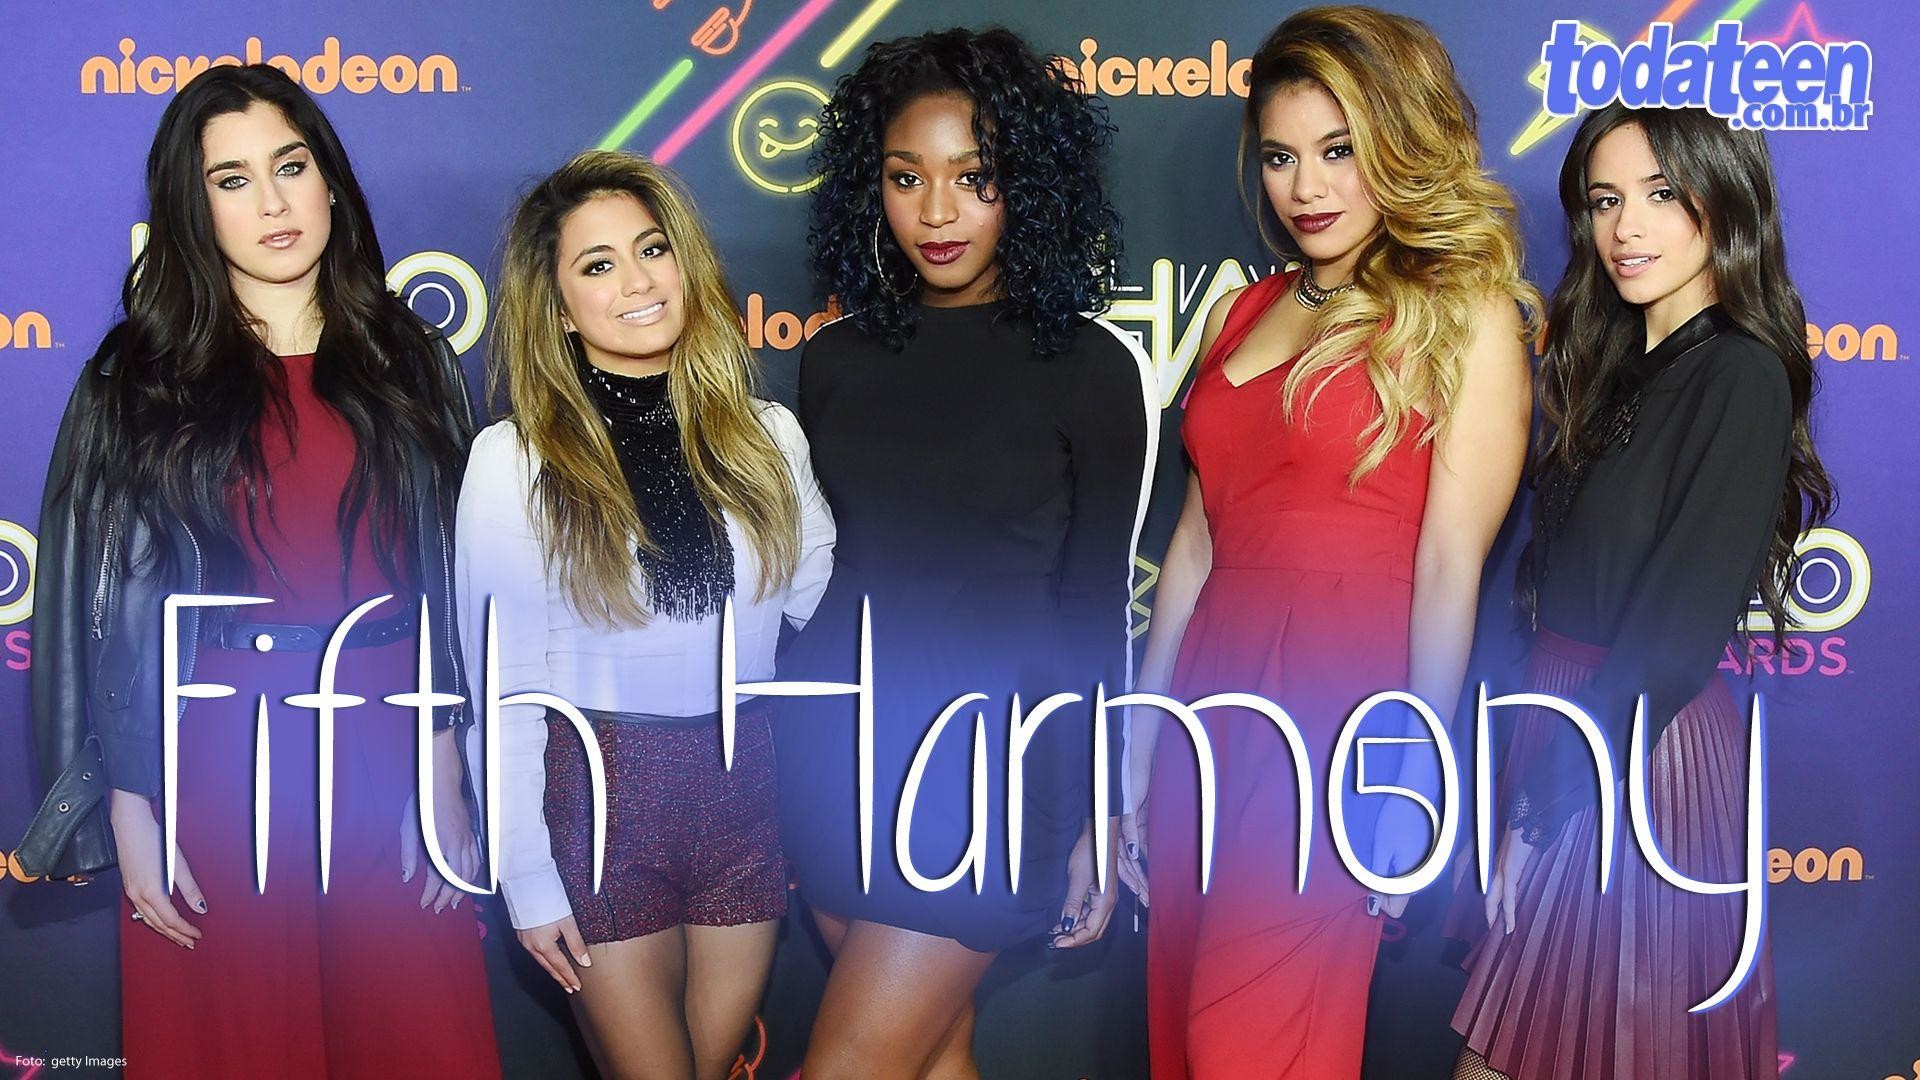 1920x1080 ... Fifth Harmony Wallpaper for (Android) Free Download on MoboMarket ...